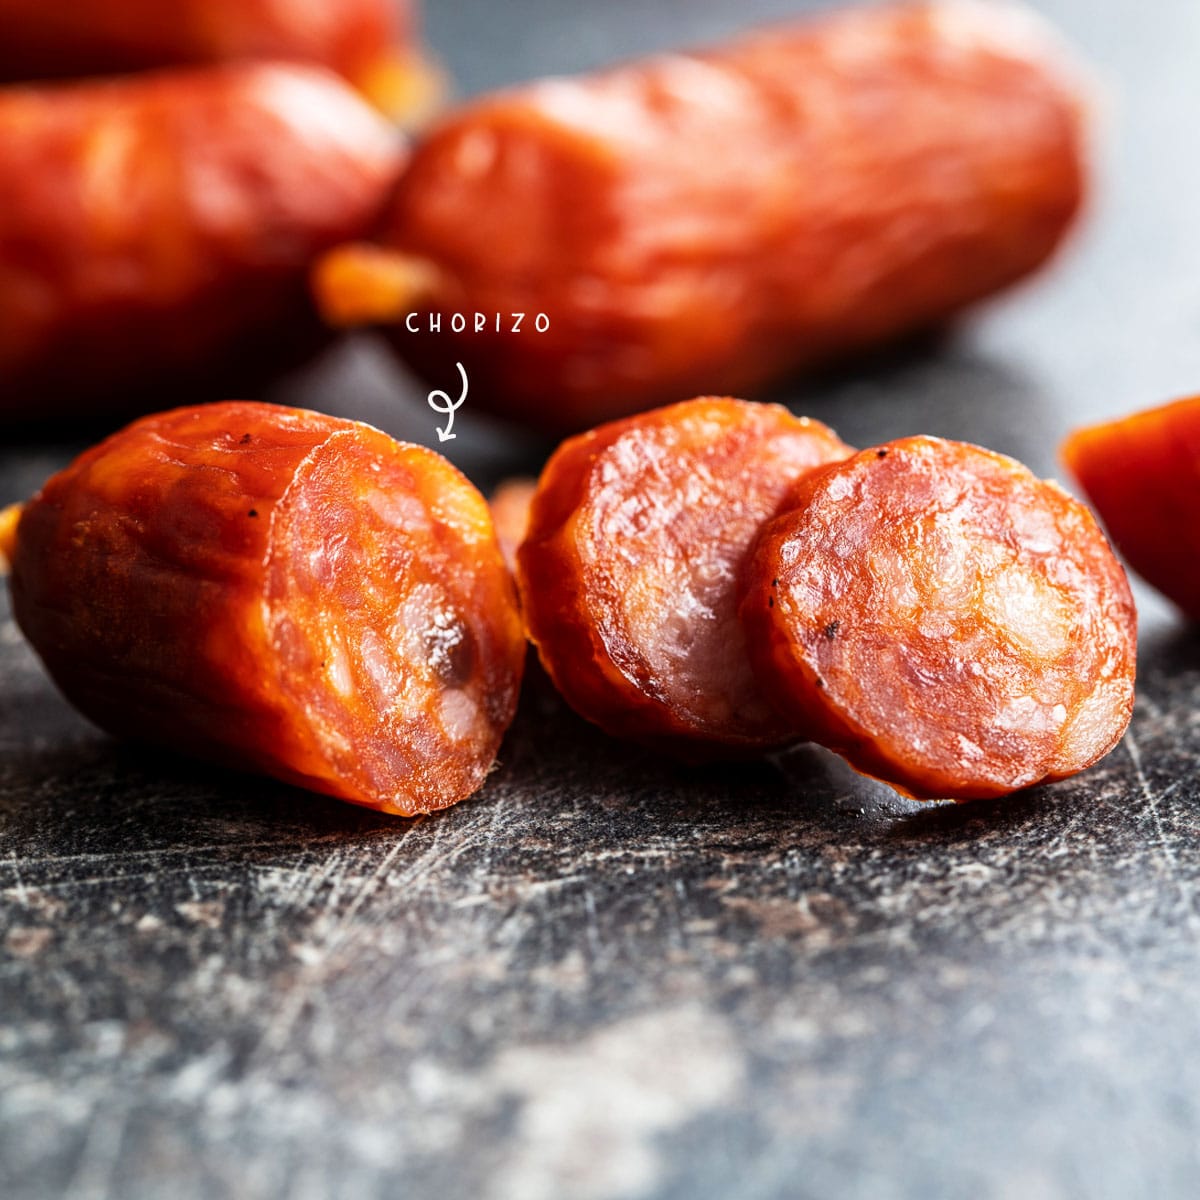 Is there a way on how to tell chorizo is done without cutting into it? Keep reading for tips on how to tell when your chorizo is cooked perfectly every time.